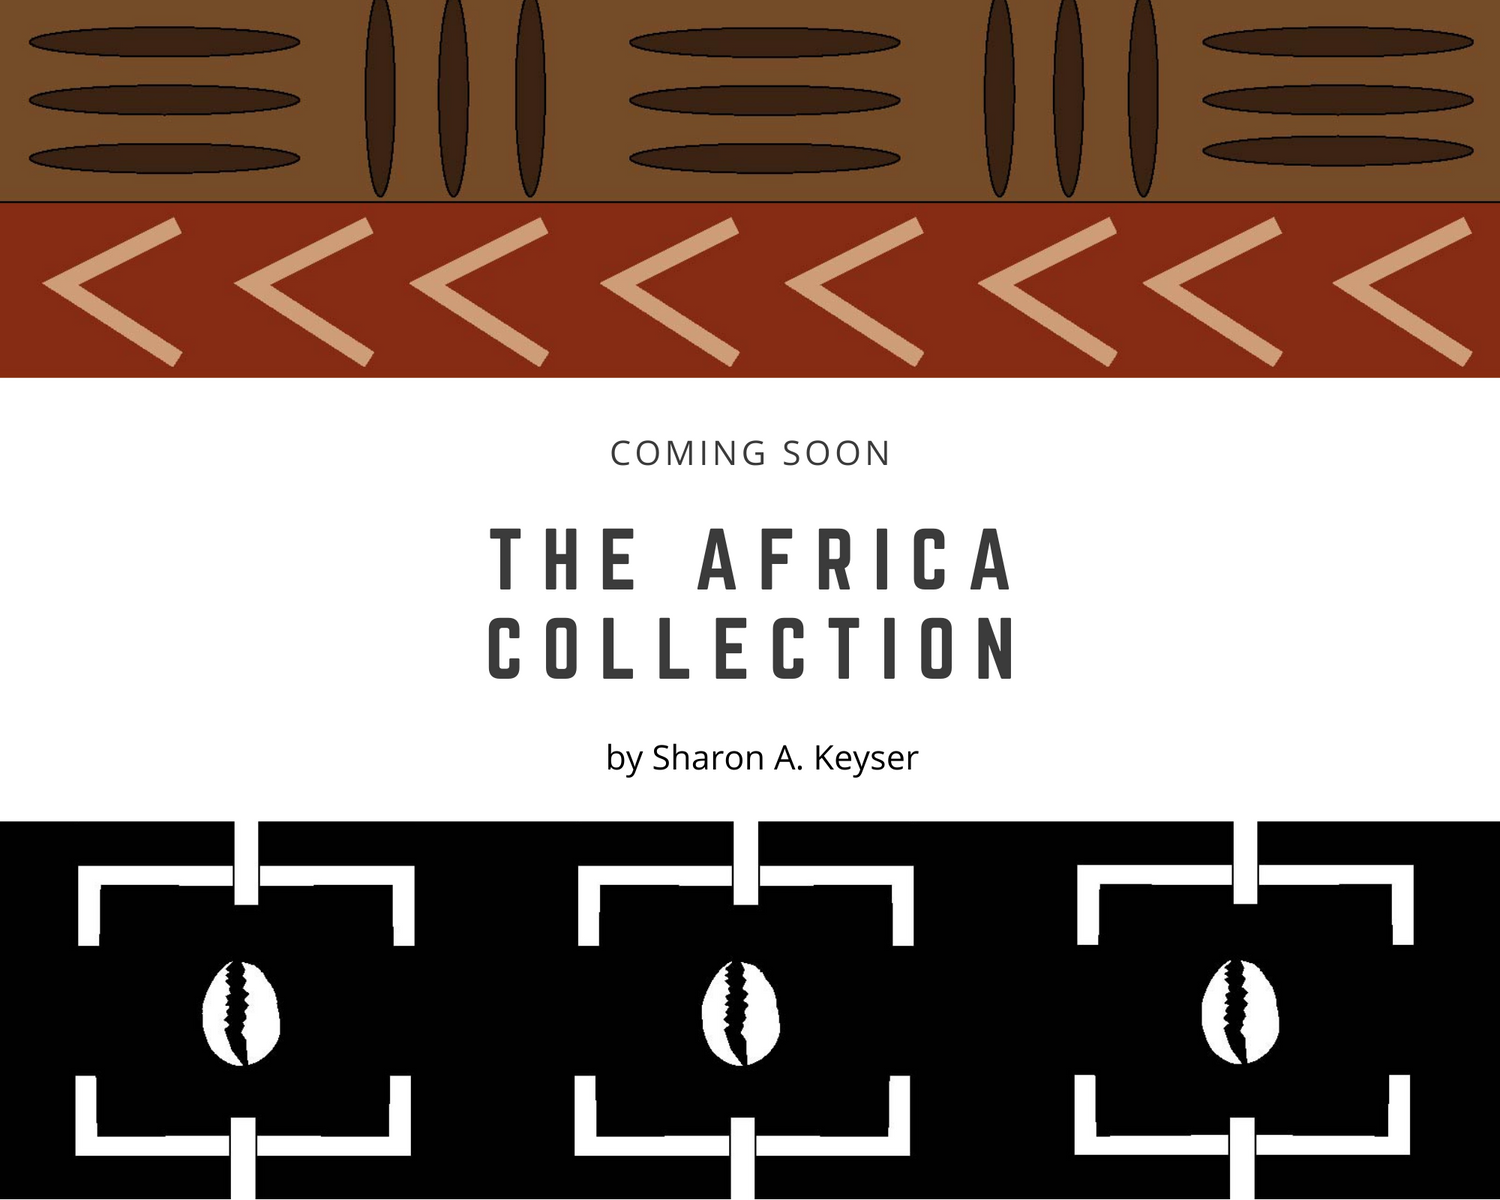 The Africa Collection